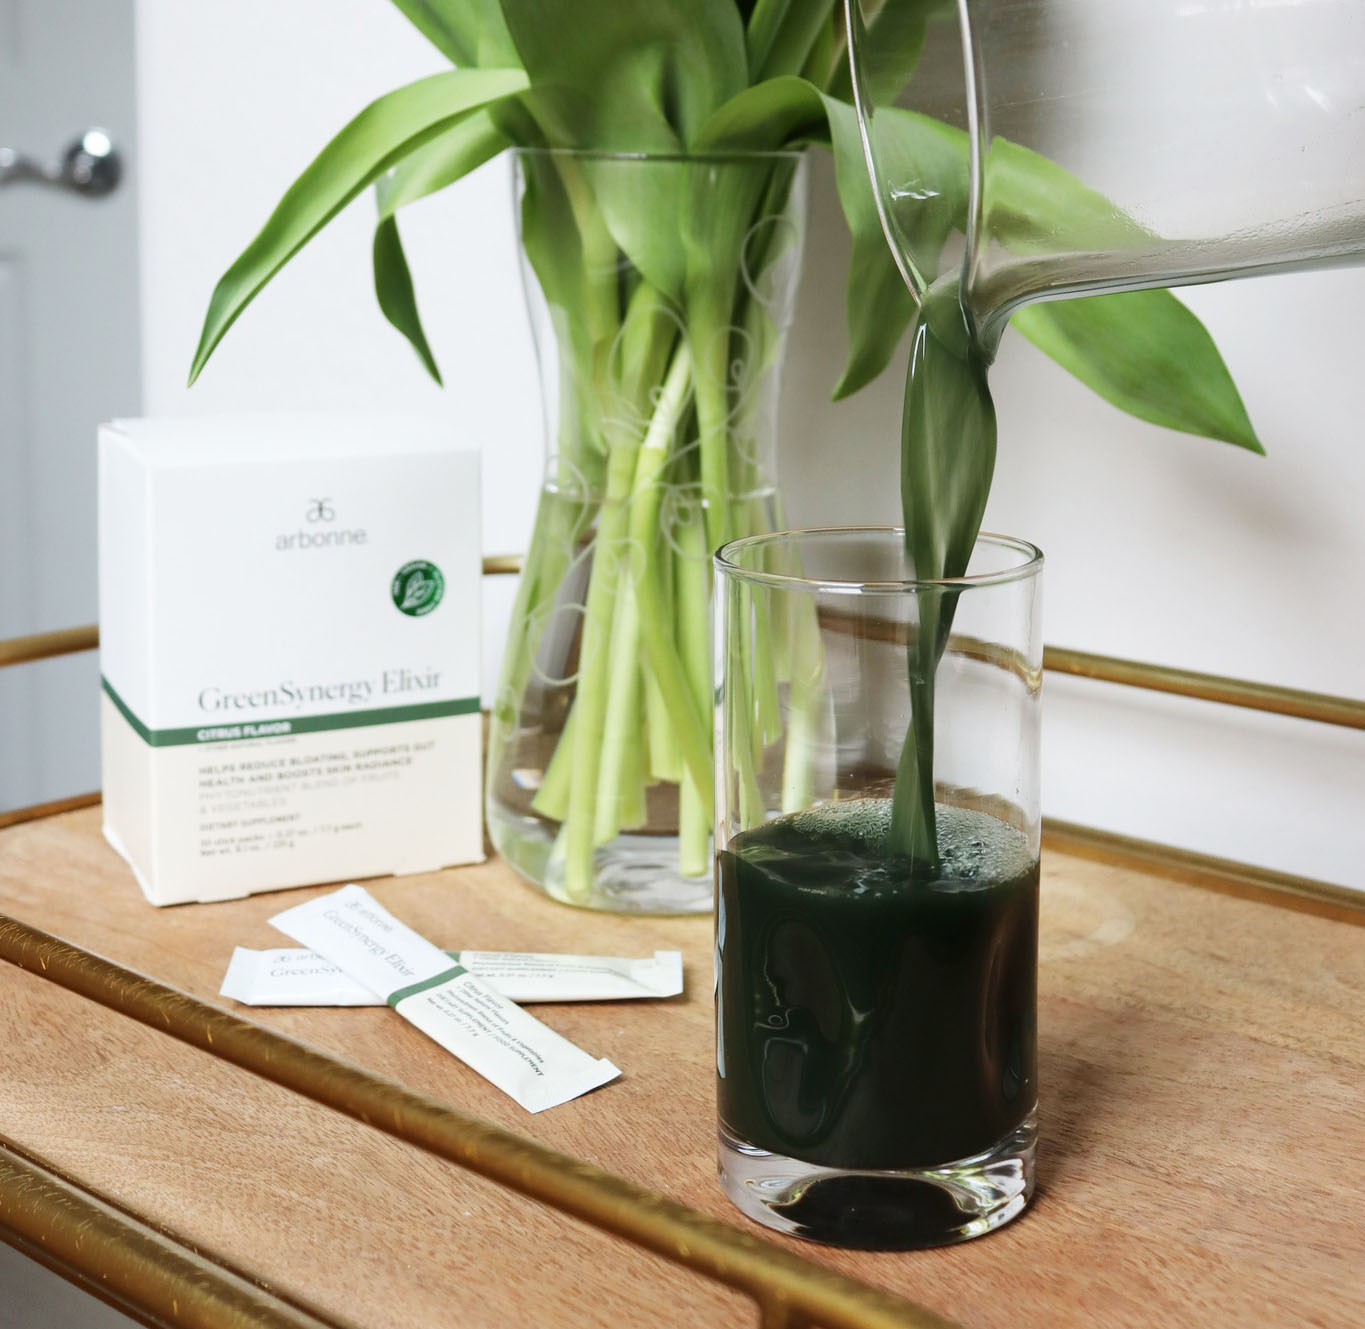 Pouring Arbonne GreenSynergy Elixir into a glass on a wooden table, with the product box and packets nearby, and a vase of green leaves in the background.